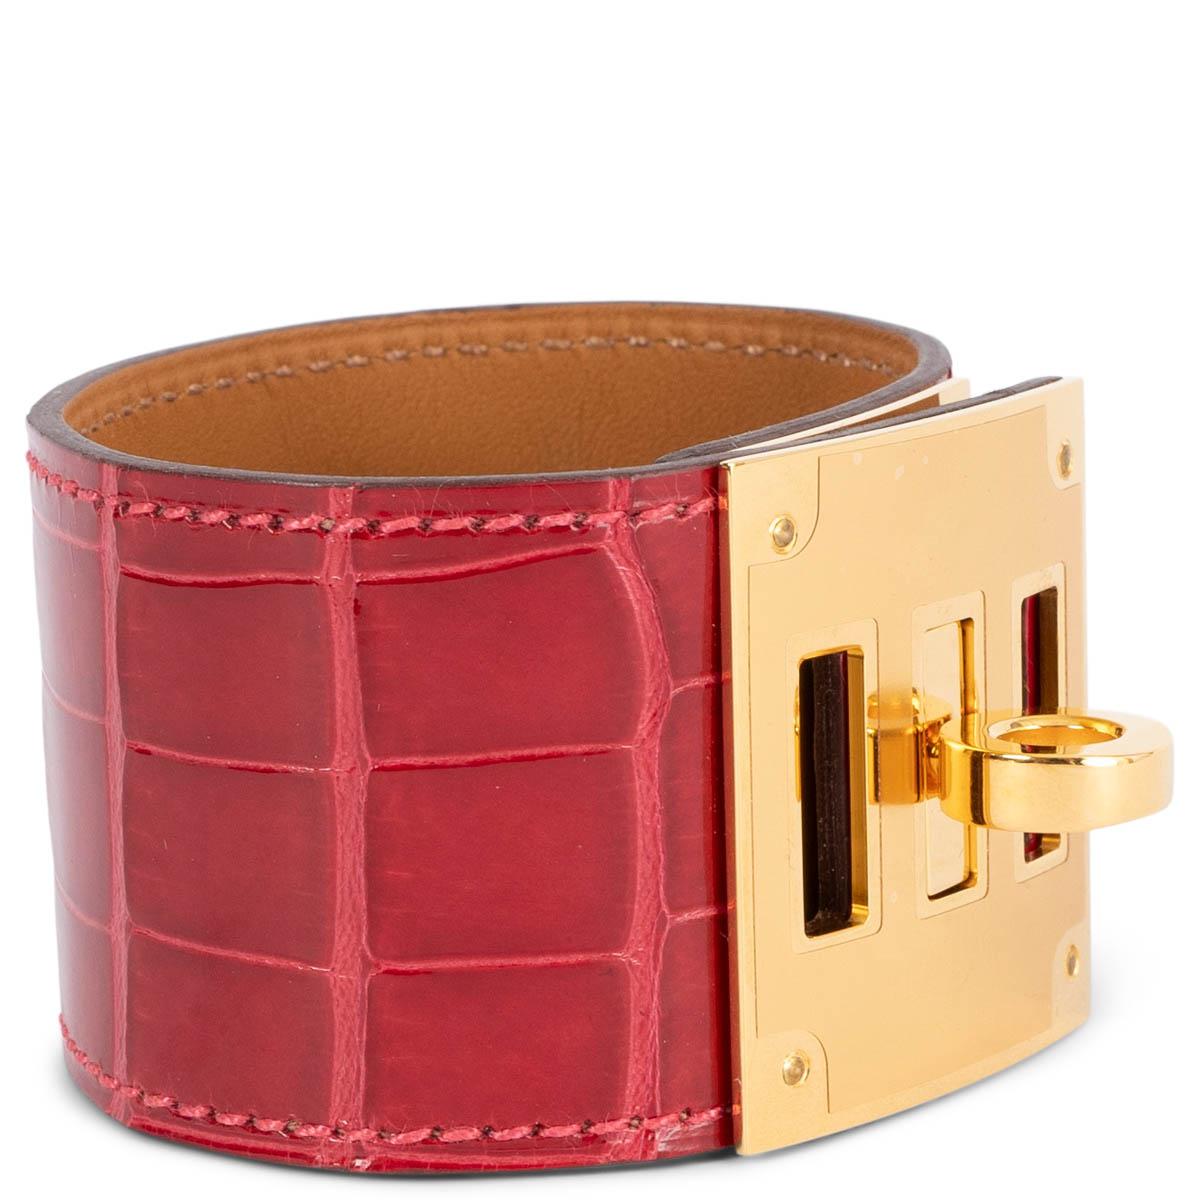 100% authentic Hermès Kelly Dog cuff bracelet in Braise (red) shiny alligator leather featuring contrasting gold-plated hardware. Has been worn and and is in virtually new condition.

Measurements
Tag Size	T2
Height	3.4cm (1.3in)
Length	19cm